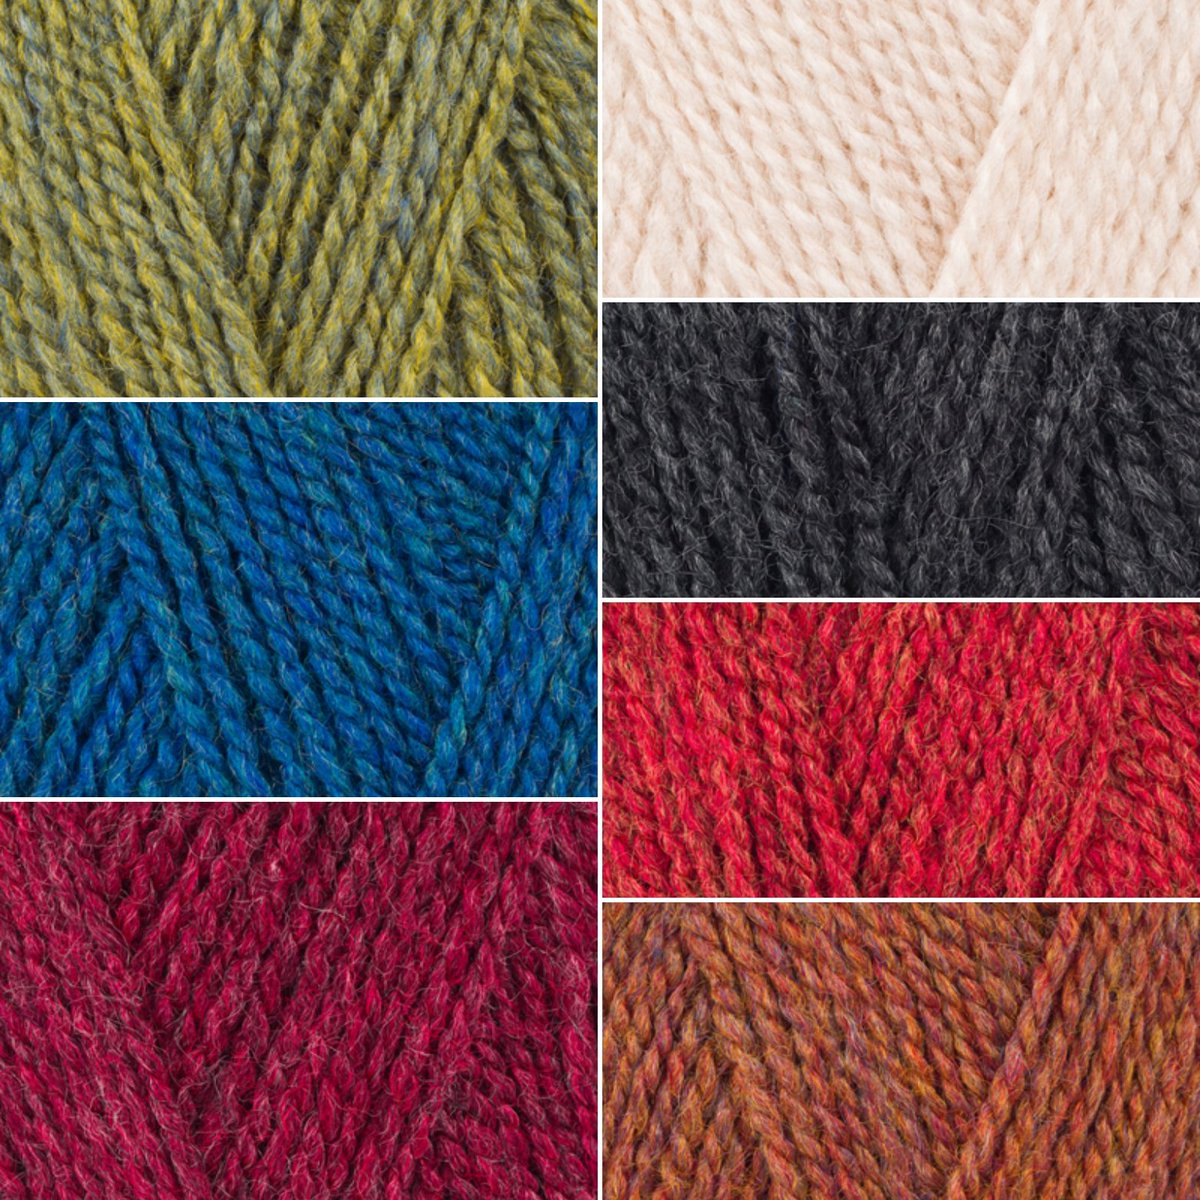 🧶🧶 NEW 🧶🧶 Stylecraft have launched 7 NEW shades of Highland Heather DK – Marmalade, Terrier, Firth, Hawthorn, Lichen, Tayberry and Brose. #thelostsheepwoolshop #stylecraft #stylecraftyarns #stylecrafthighlandheathers #newshades #newyarn #newcolours #new #newinstock